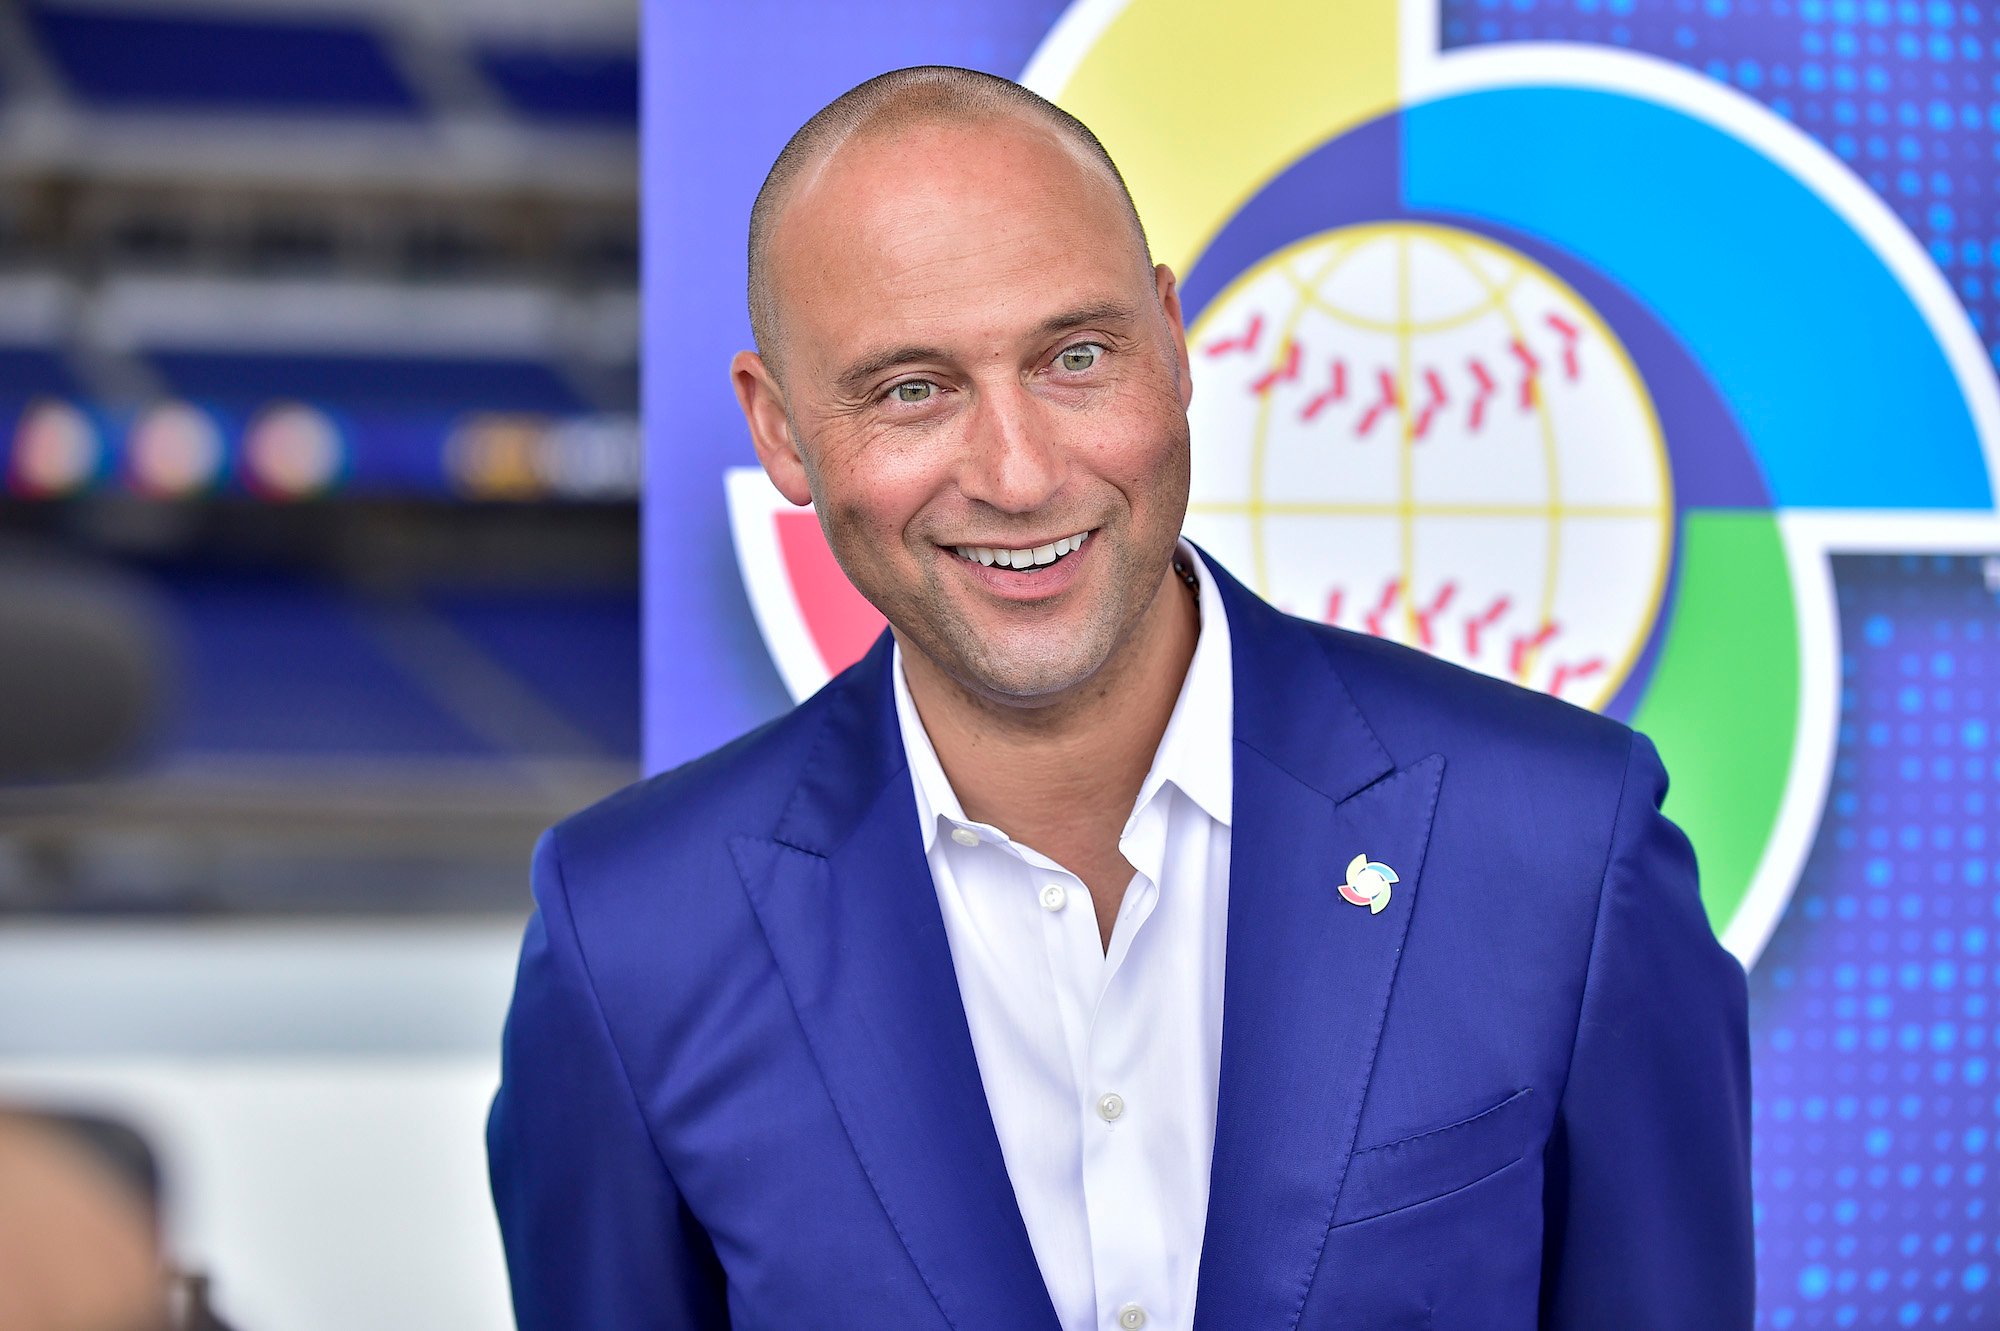 Derek Jeter's House Was Rented to Tom Brady and Gisele Bündchen Then